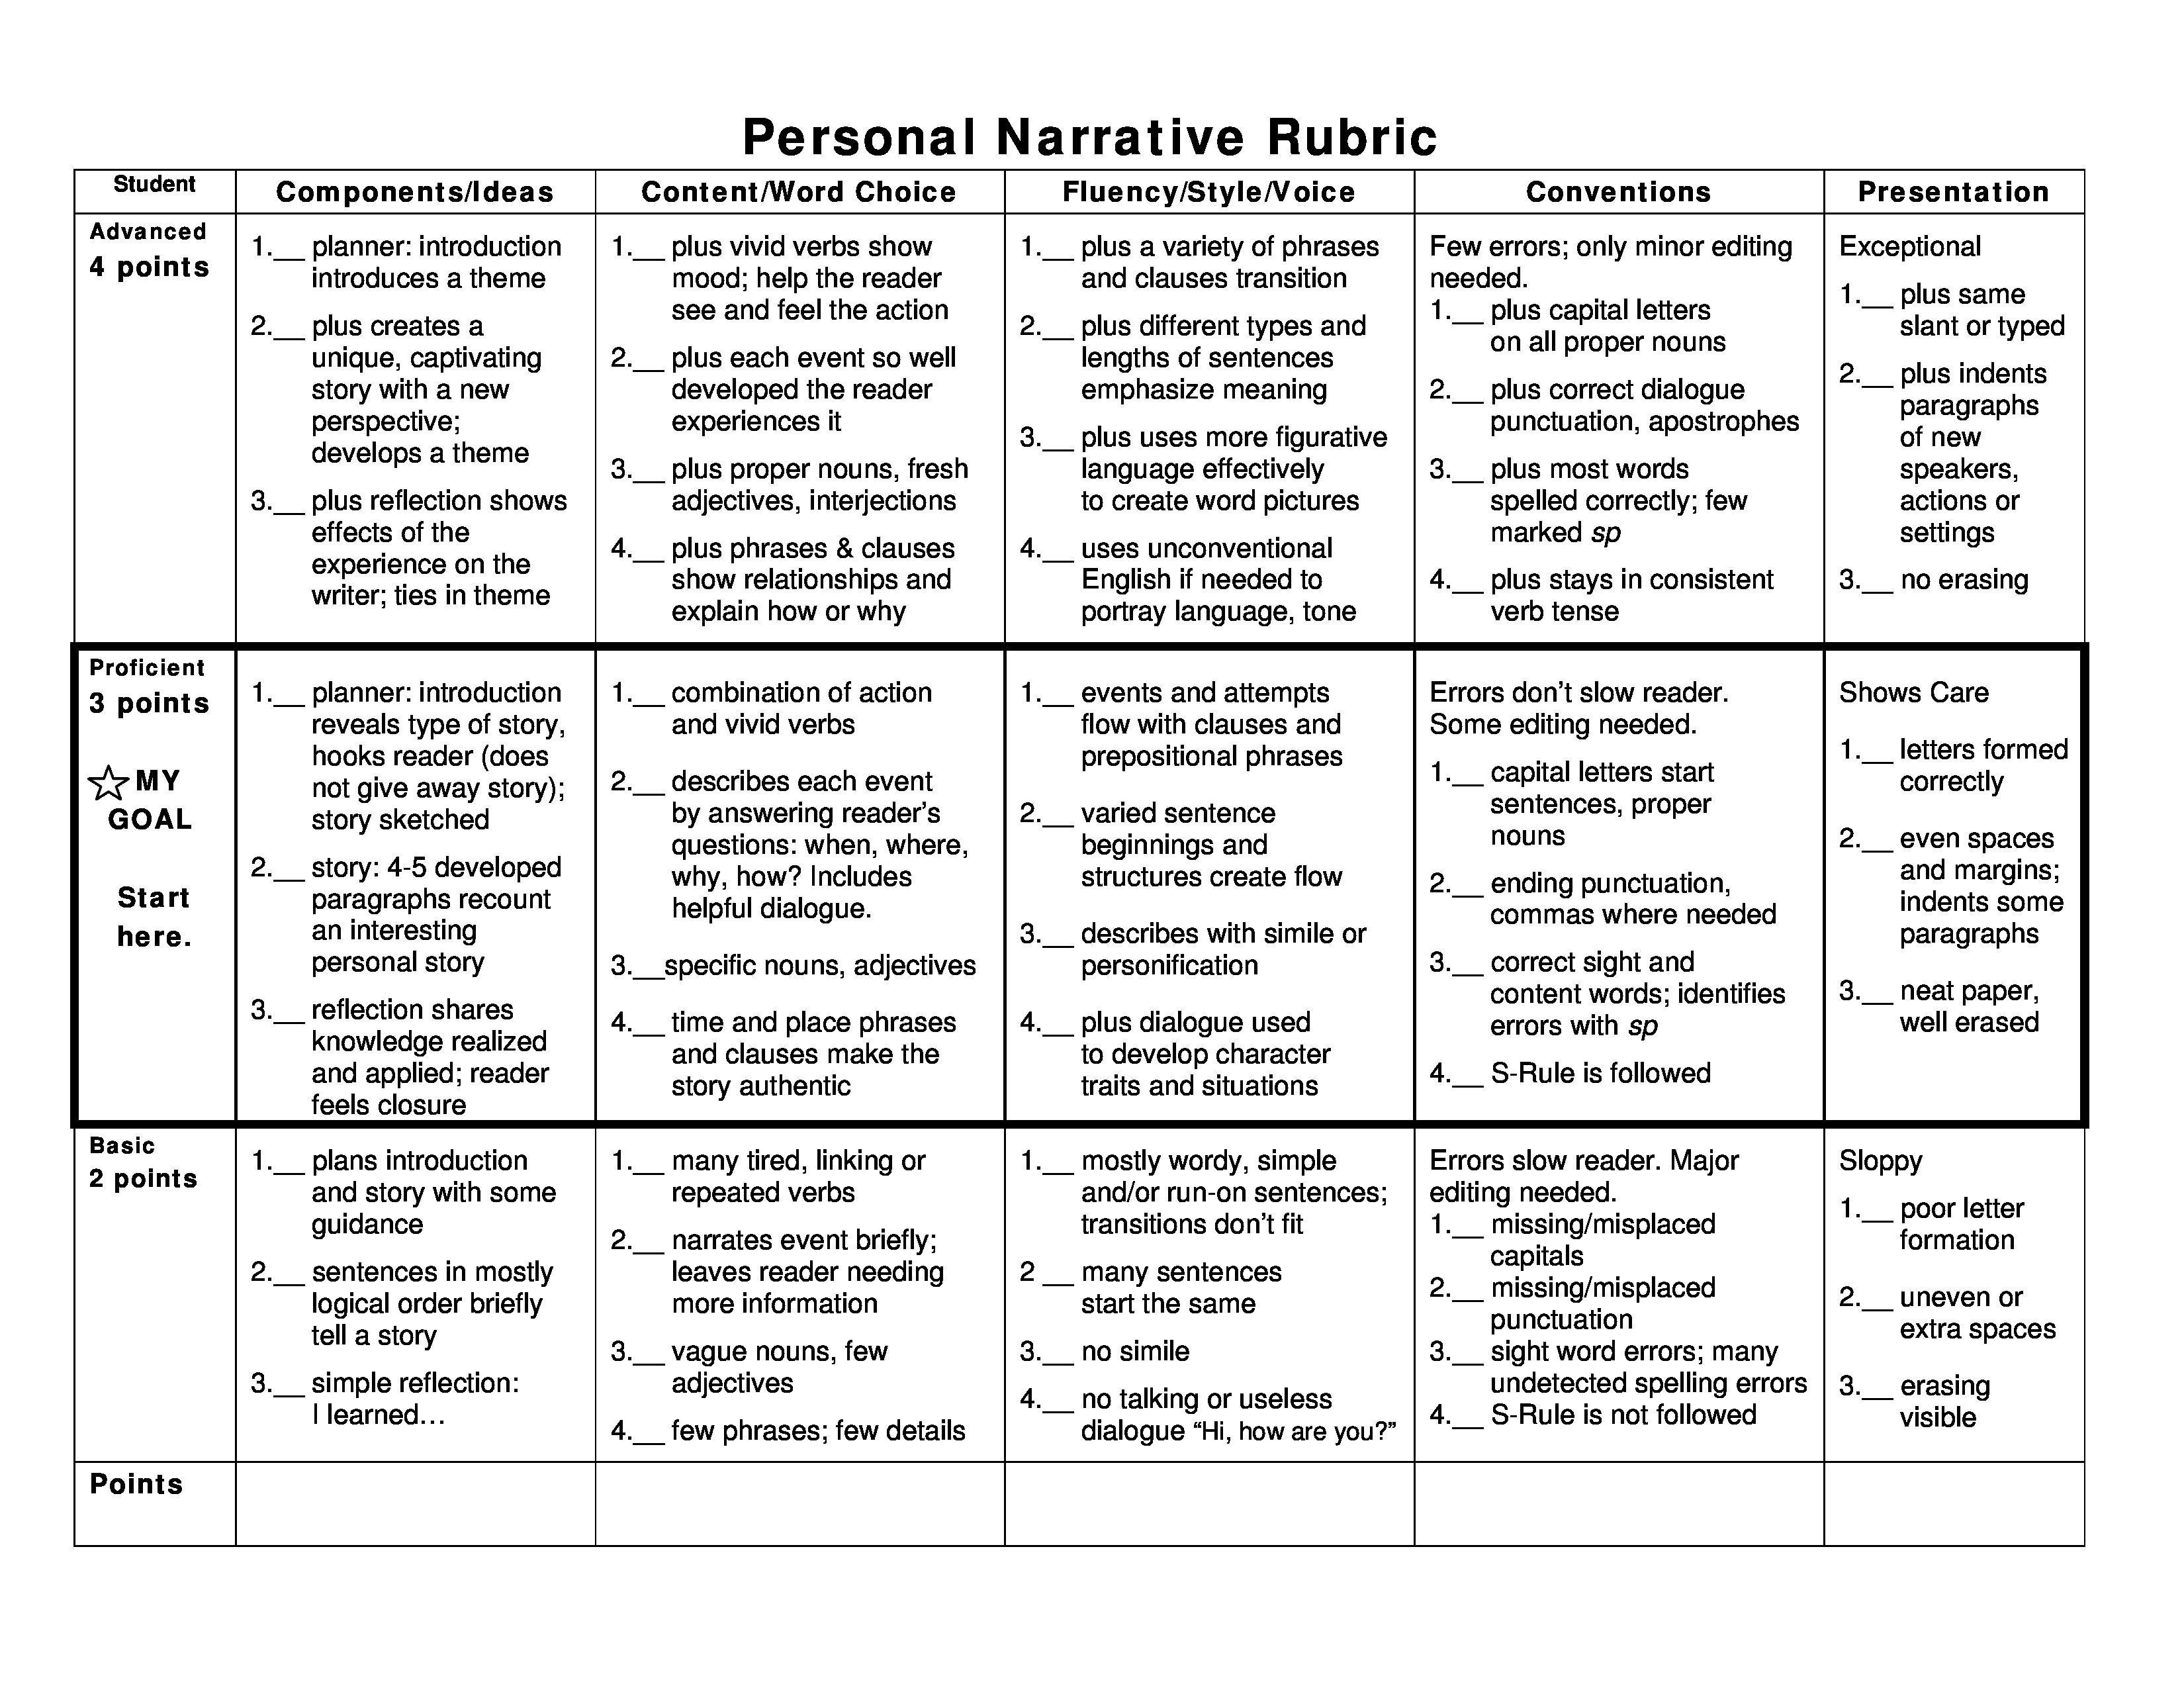 Compare and contrast essay rubric for high school